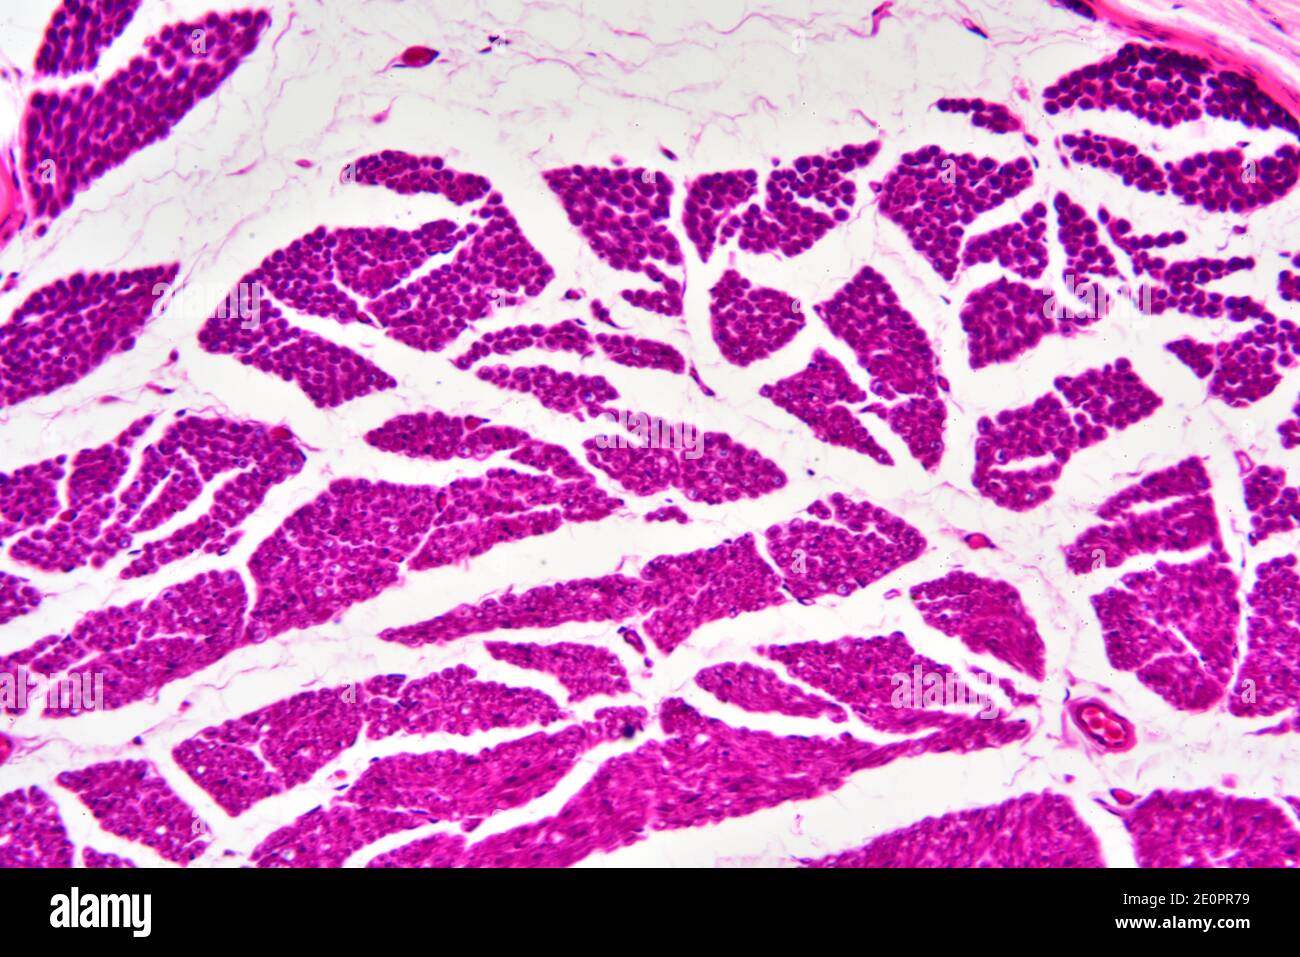 Human nerve fibers with axon fascicles. X125 at 10 cm wide. Stock Photo